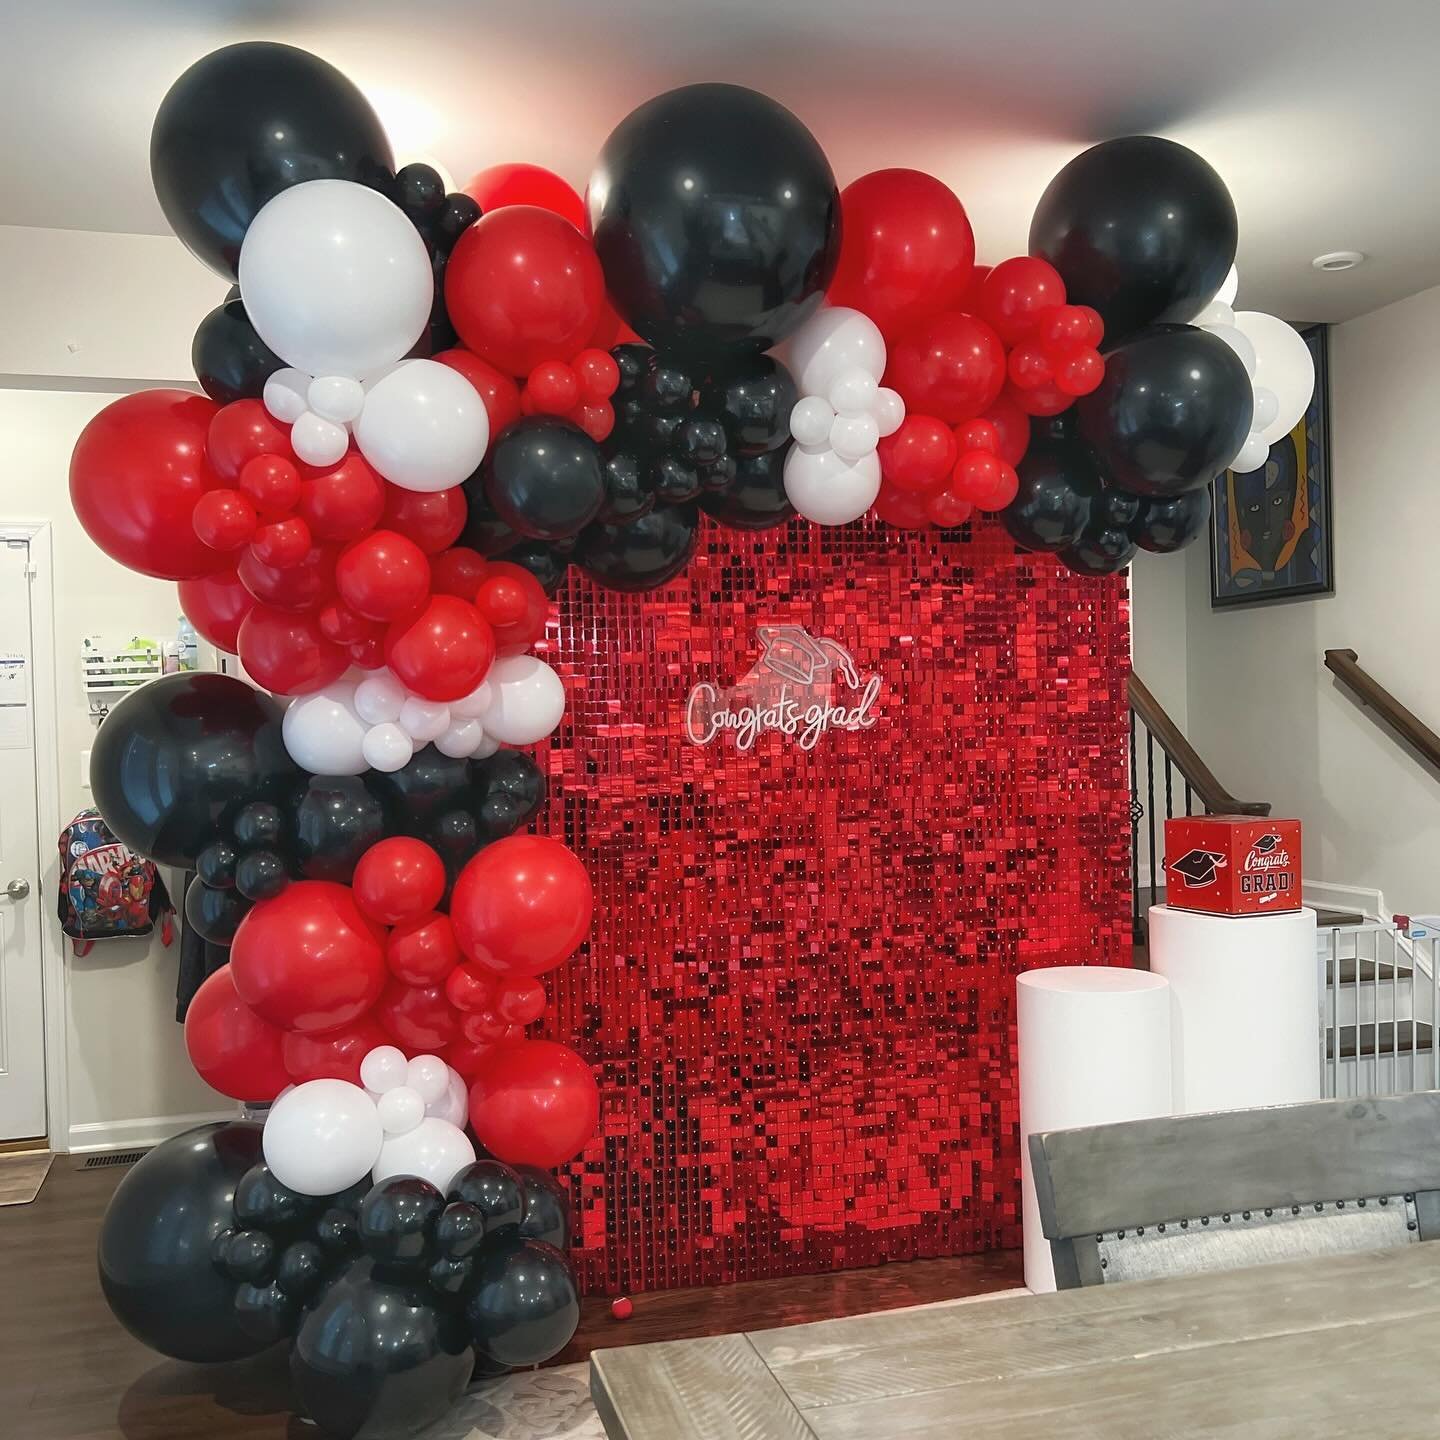 Looking for an idea for your graduation party? Shimmer walls are always a hit! There&rsquo;s a bunch of colors available too - black, gold, silver, red, purple, blue, etc. 

For more decorating ideas, click on the link in my profile to watch my YouTu